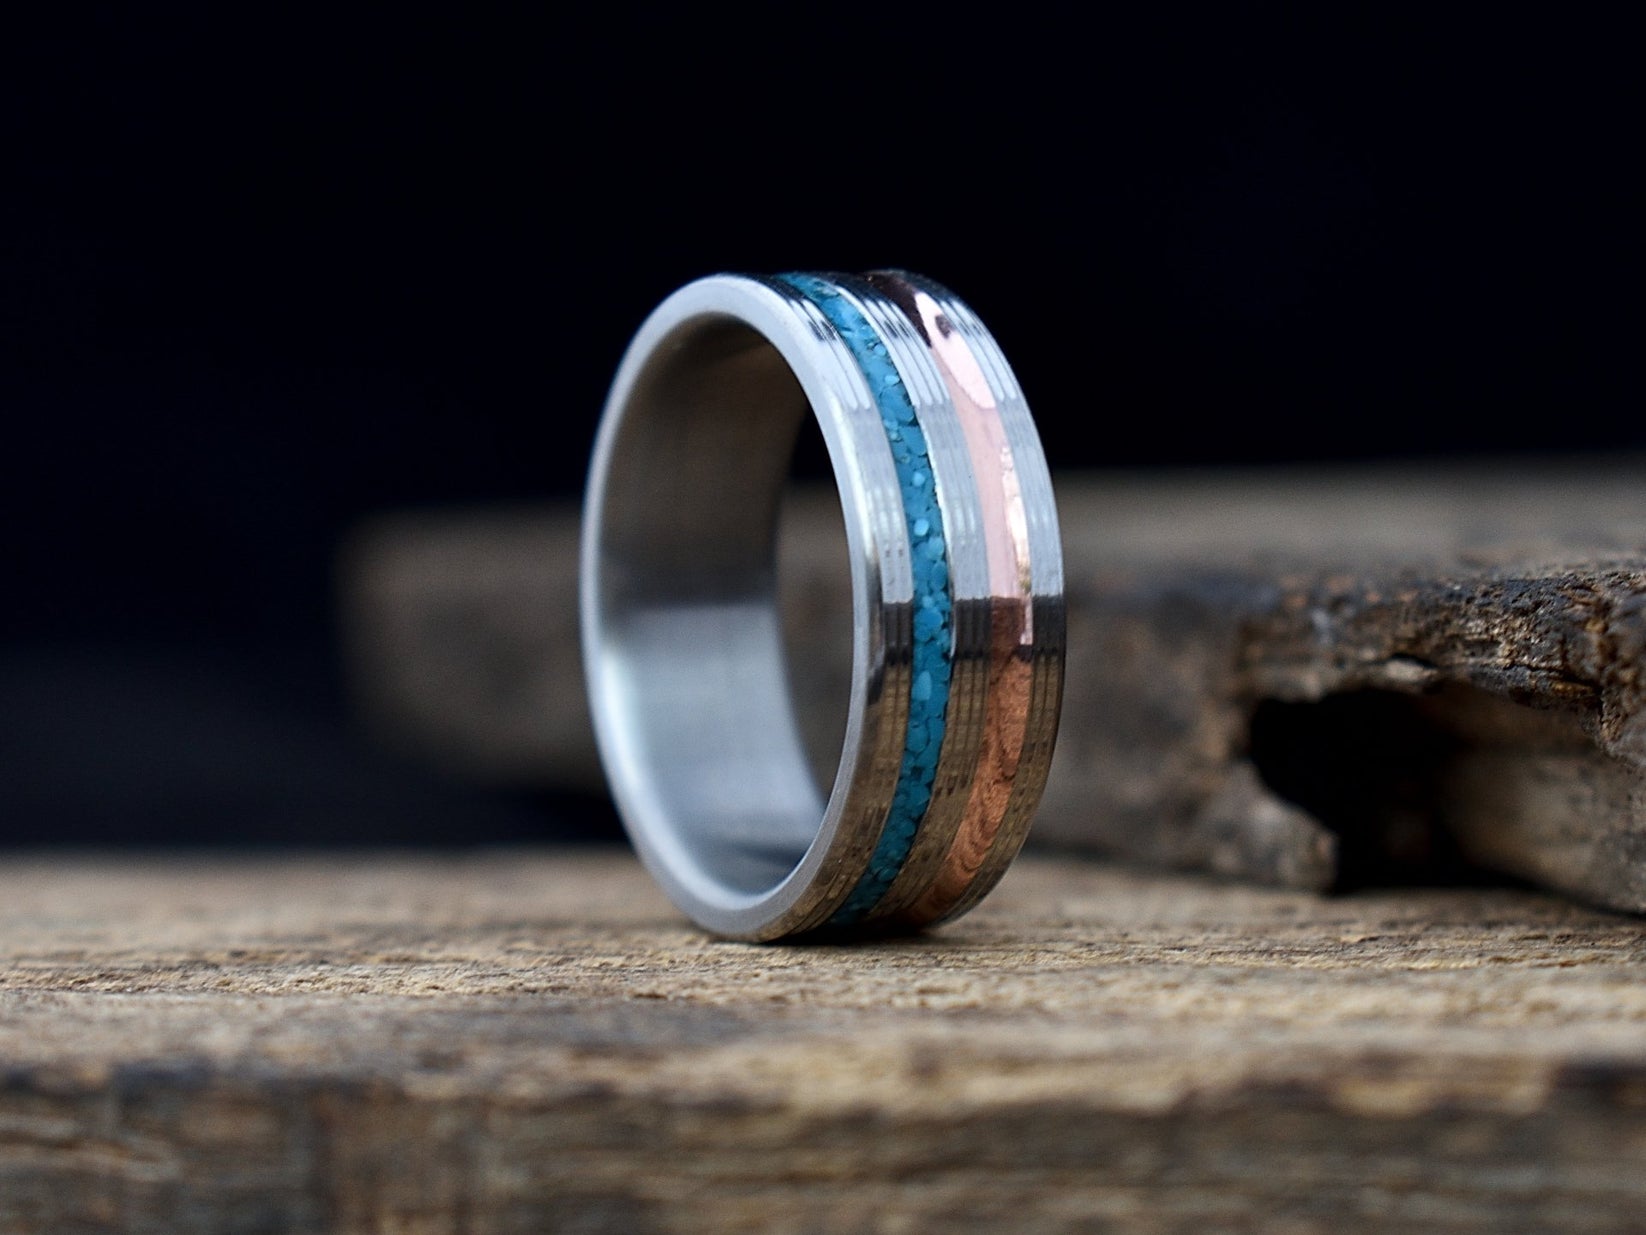 Paradox - Copper and Turquoise Inlay Men's Ring – Richter Scale Rings